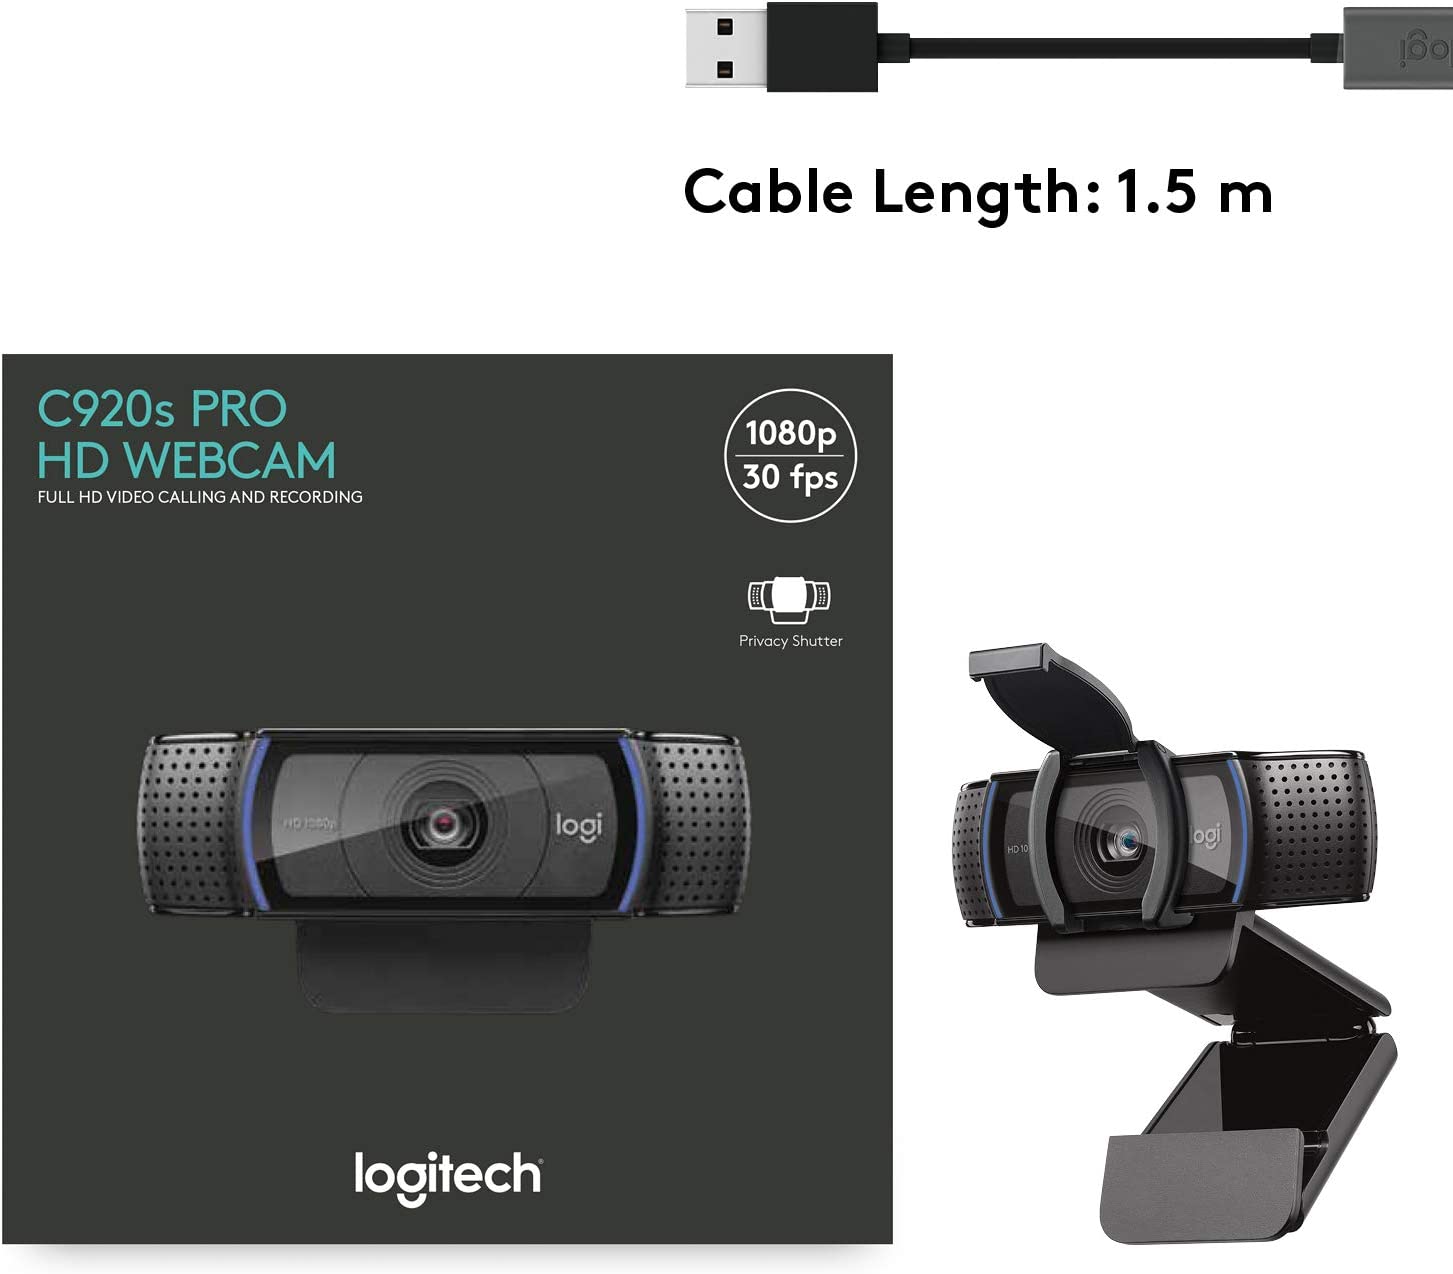 The Logitech C920s HD Pro is the best webcam for almost anyone who wants simplicity, good quality, and affordability